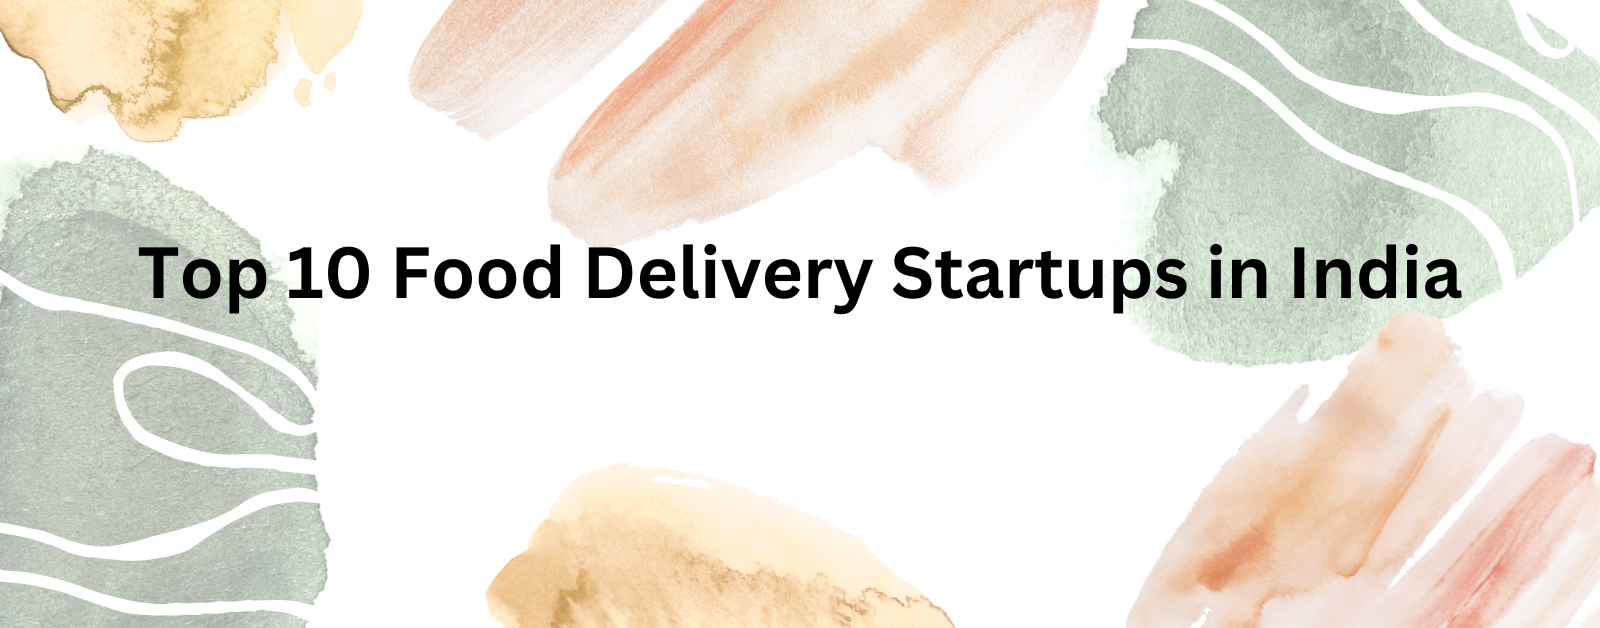 Top 10 Food Delivery Startups in India